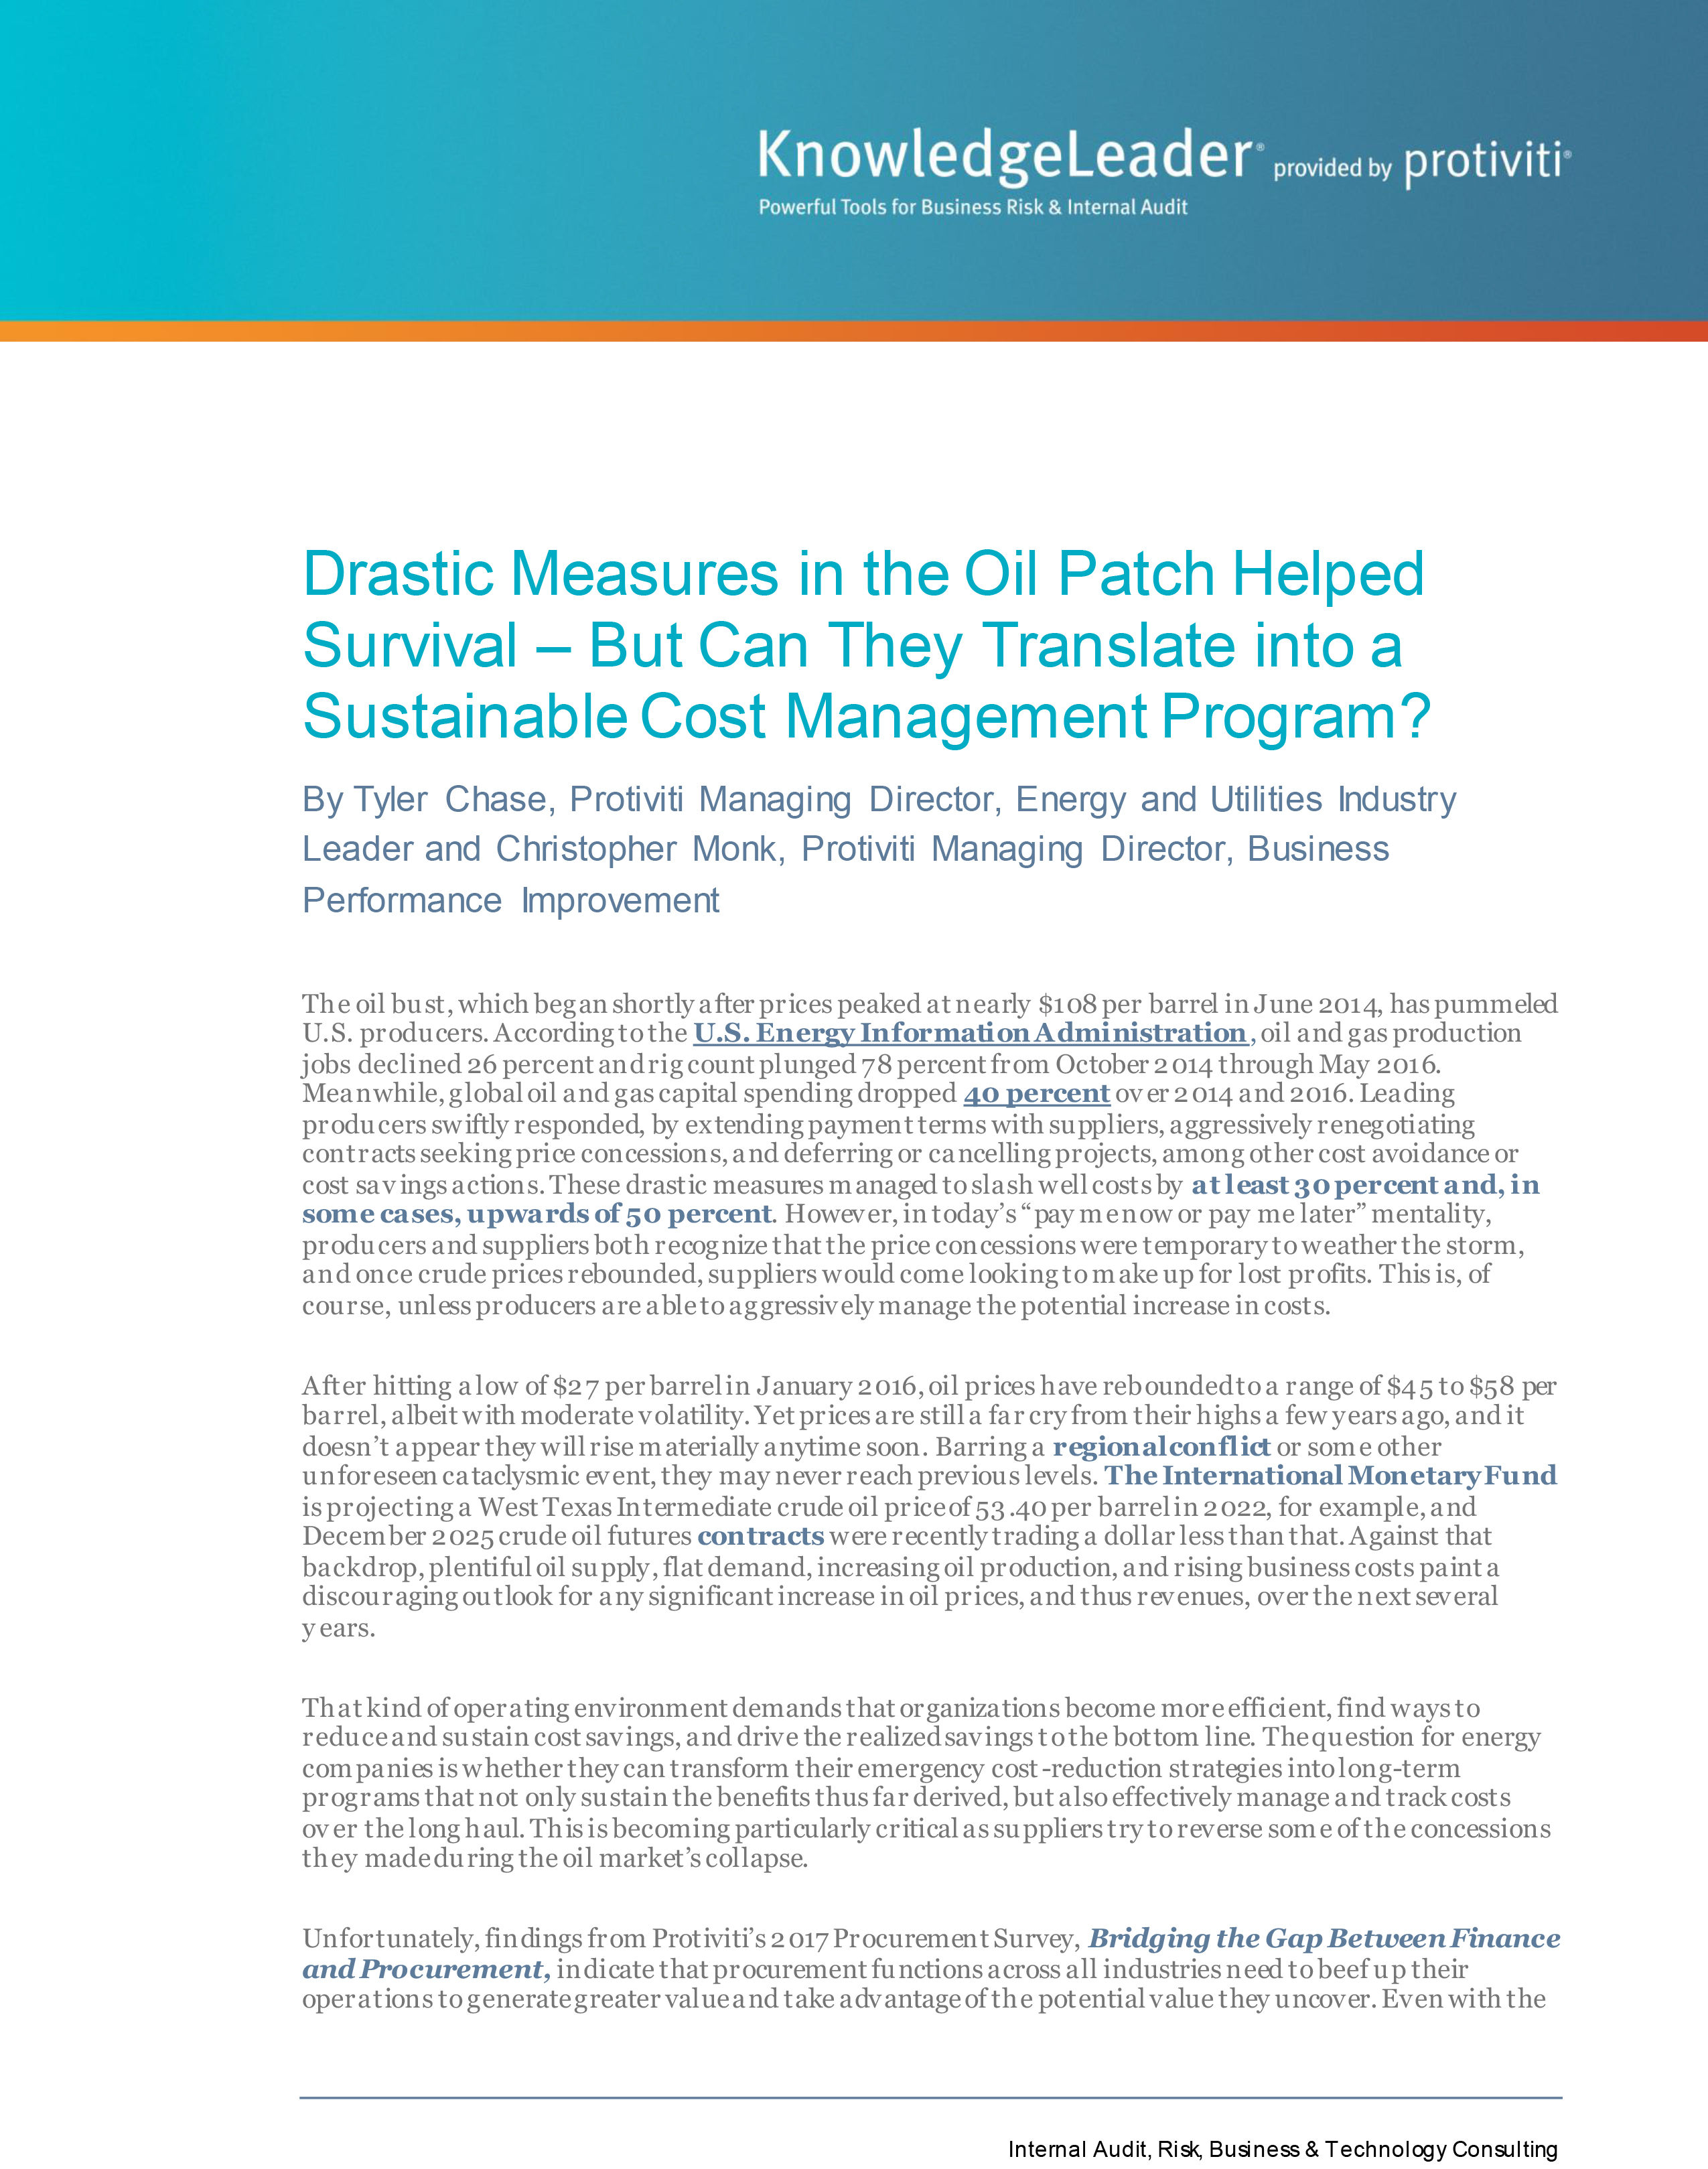 Screenshot of the first page of Drastic Measures in the Oil Patch Helped Survival – But Can They Translate into a Sustainable Cost Management Program